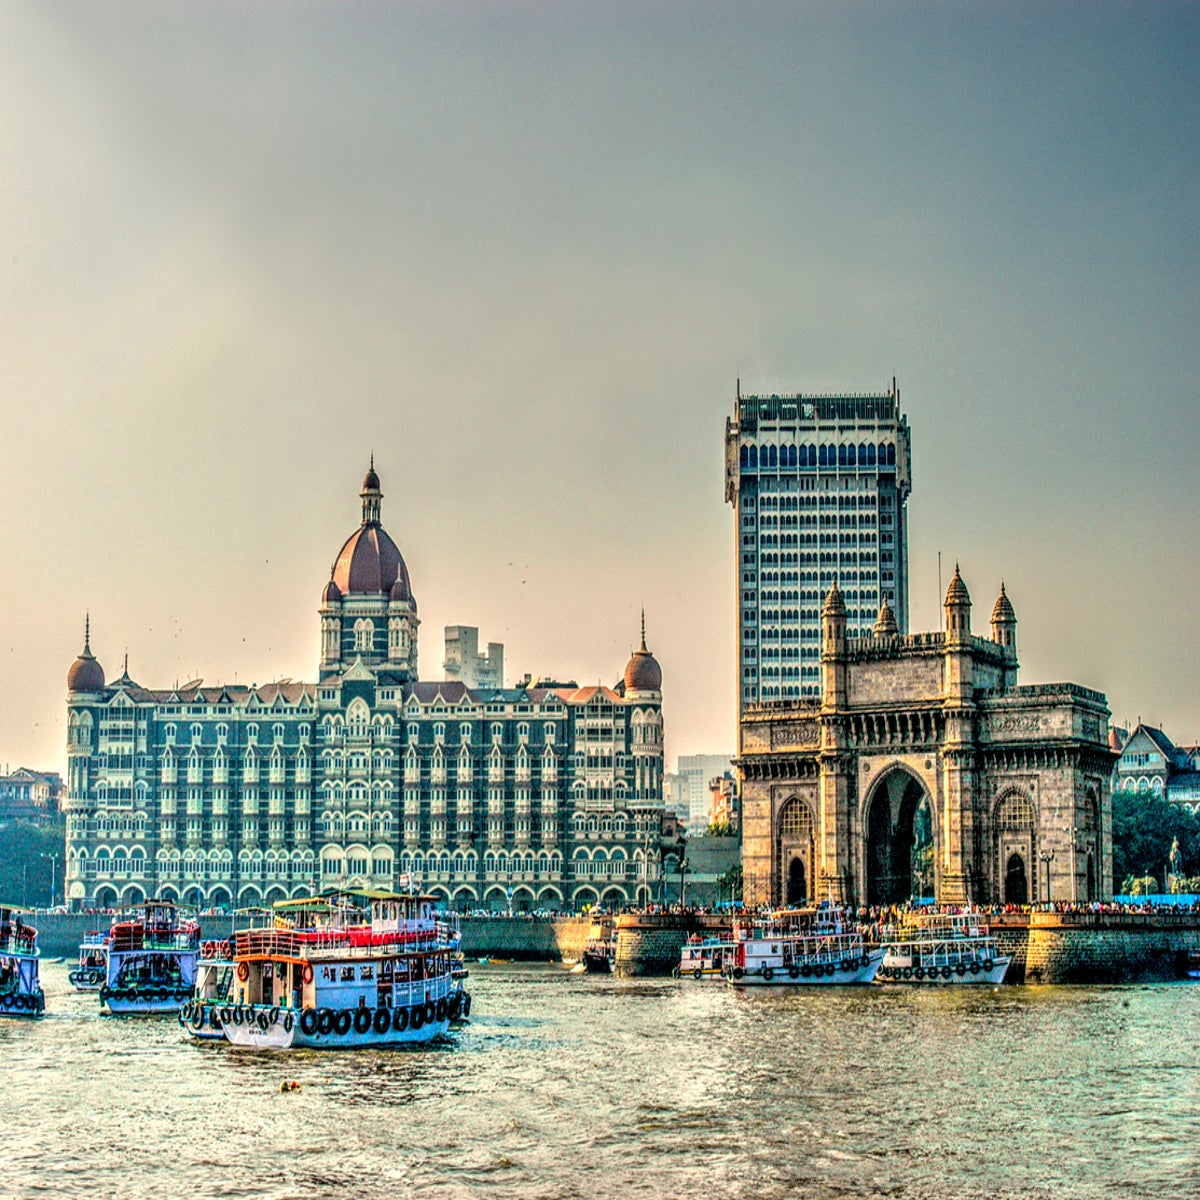 Mumbai guide: Where to eat, drink, shop and stay in India's largest city, The Independent